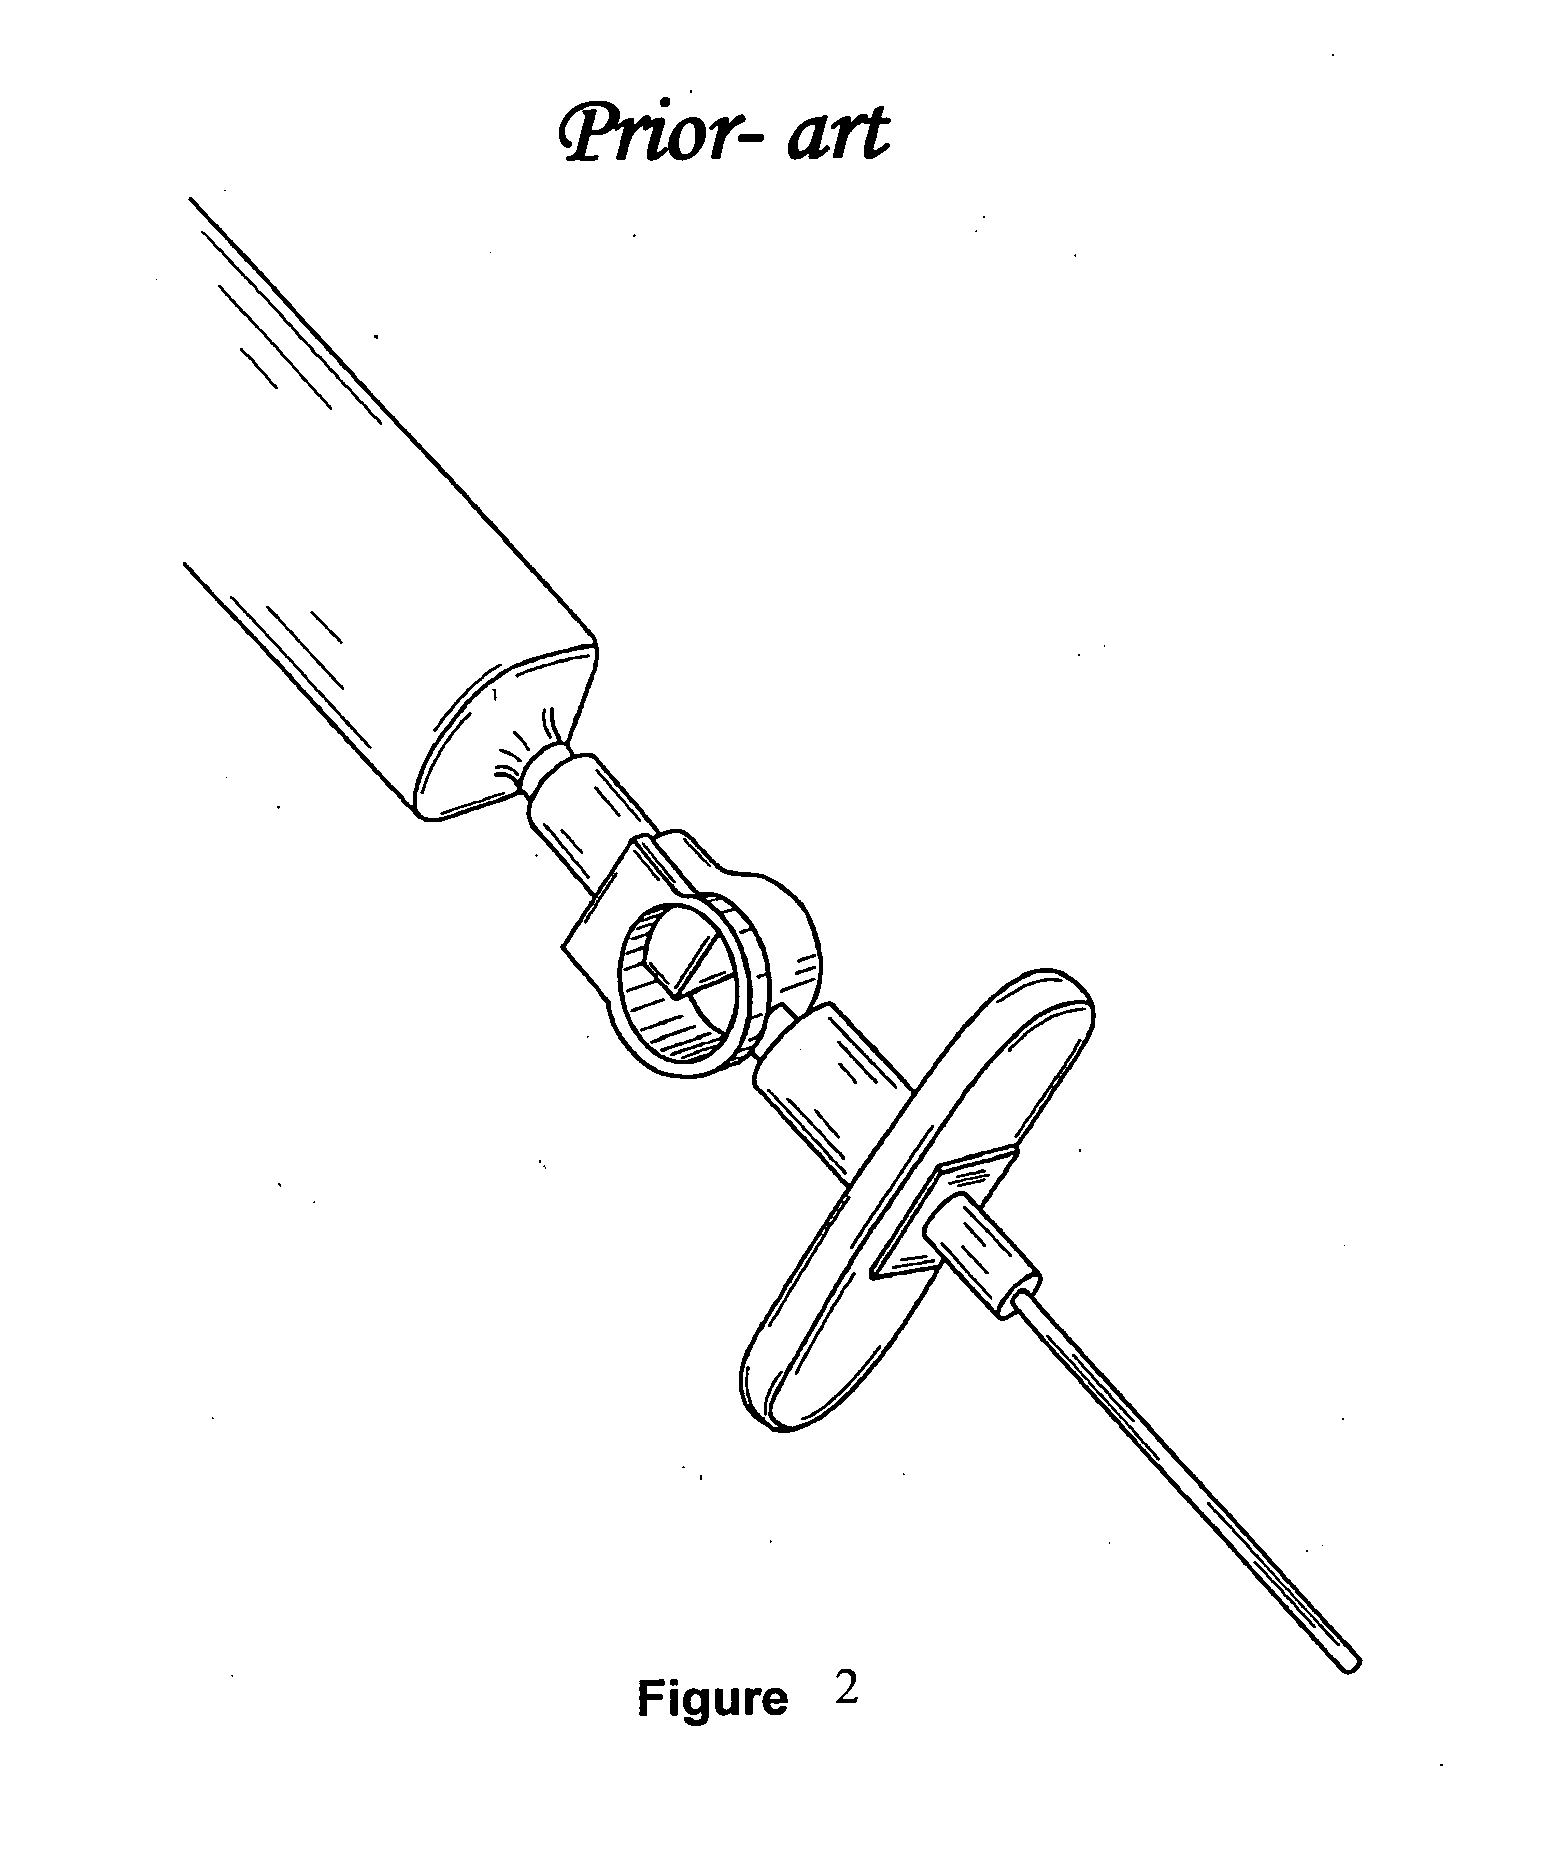 Device for locating epidural space while safeguarding against dural puncture through differential friction technique